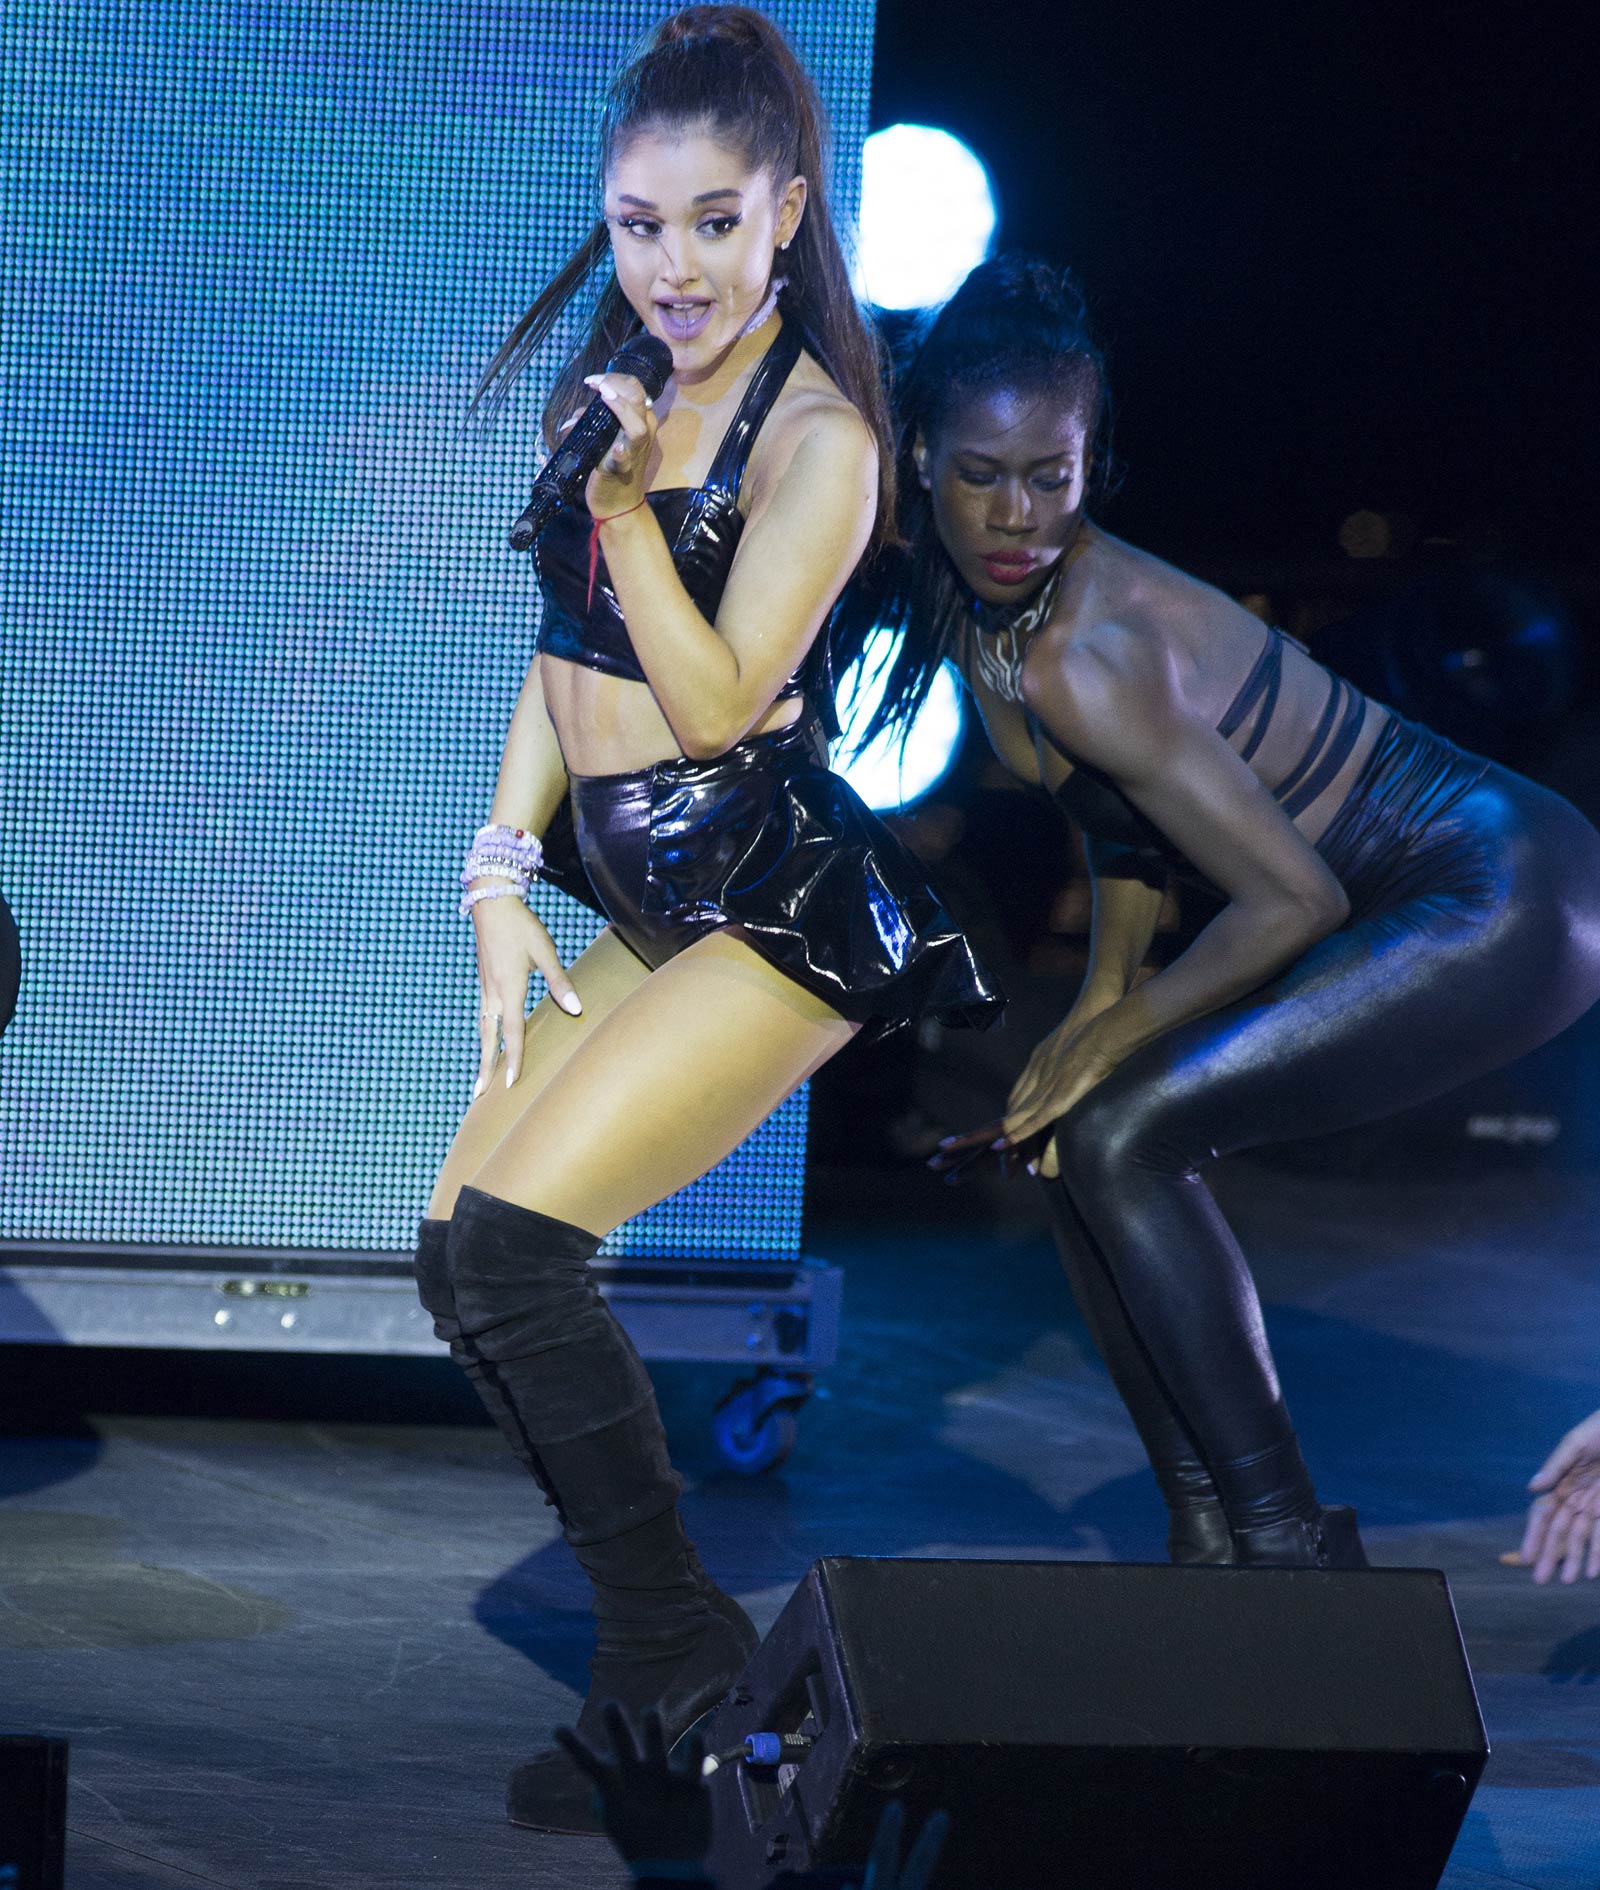 Ariana Grande performs at 29th annual NYC Pride Dance On The Pier